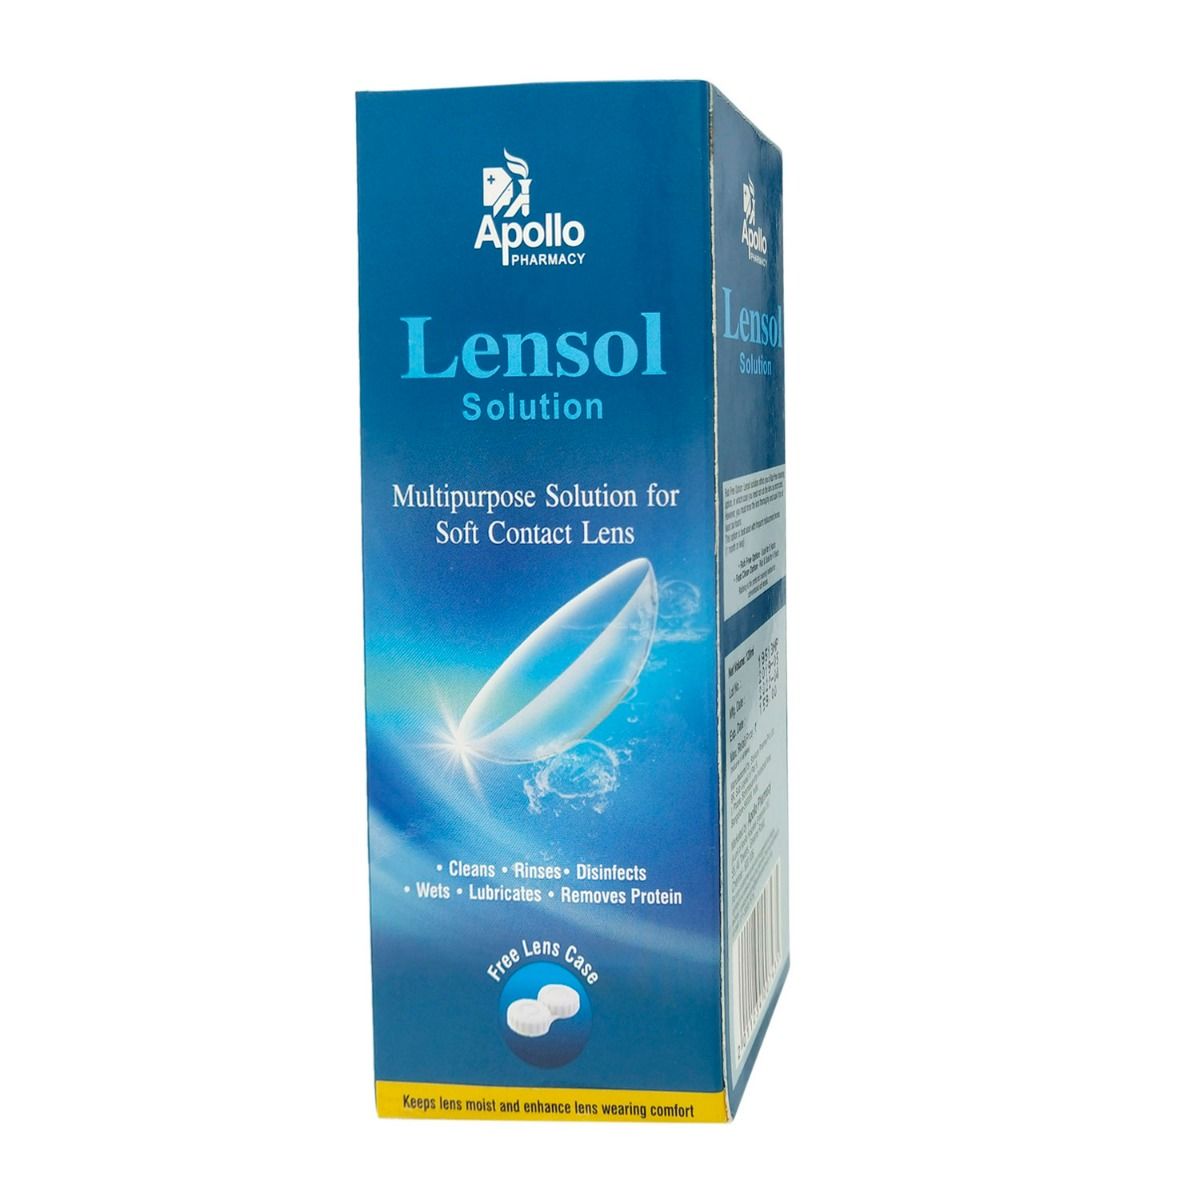 Apollo Pharmacy Lensol Solution, 120 ml, Pack of 1 